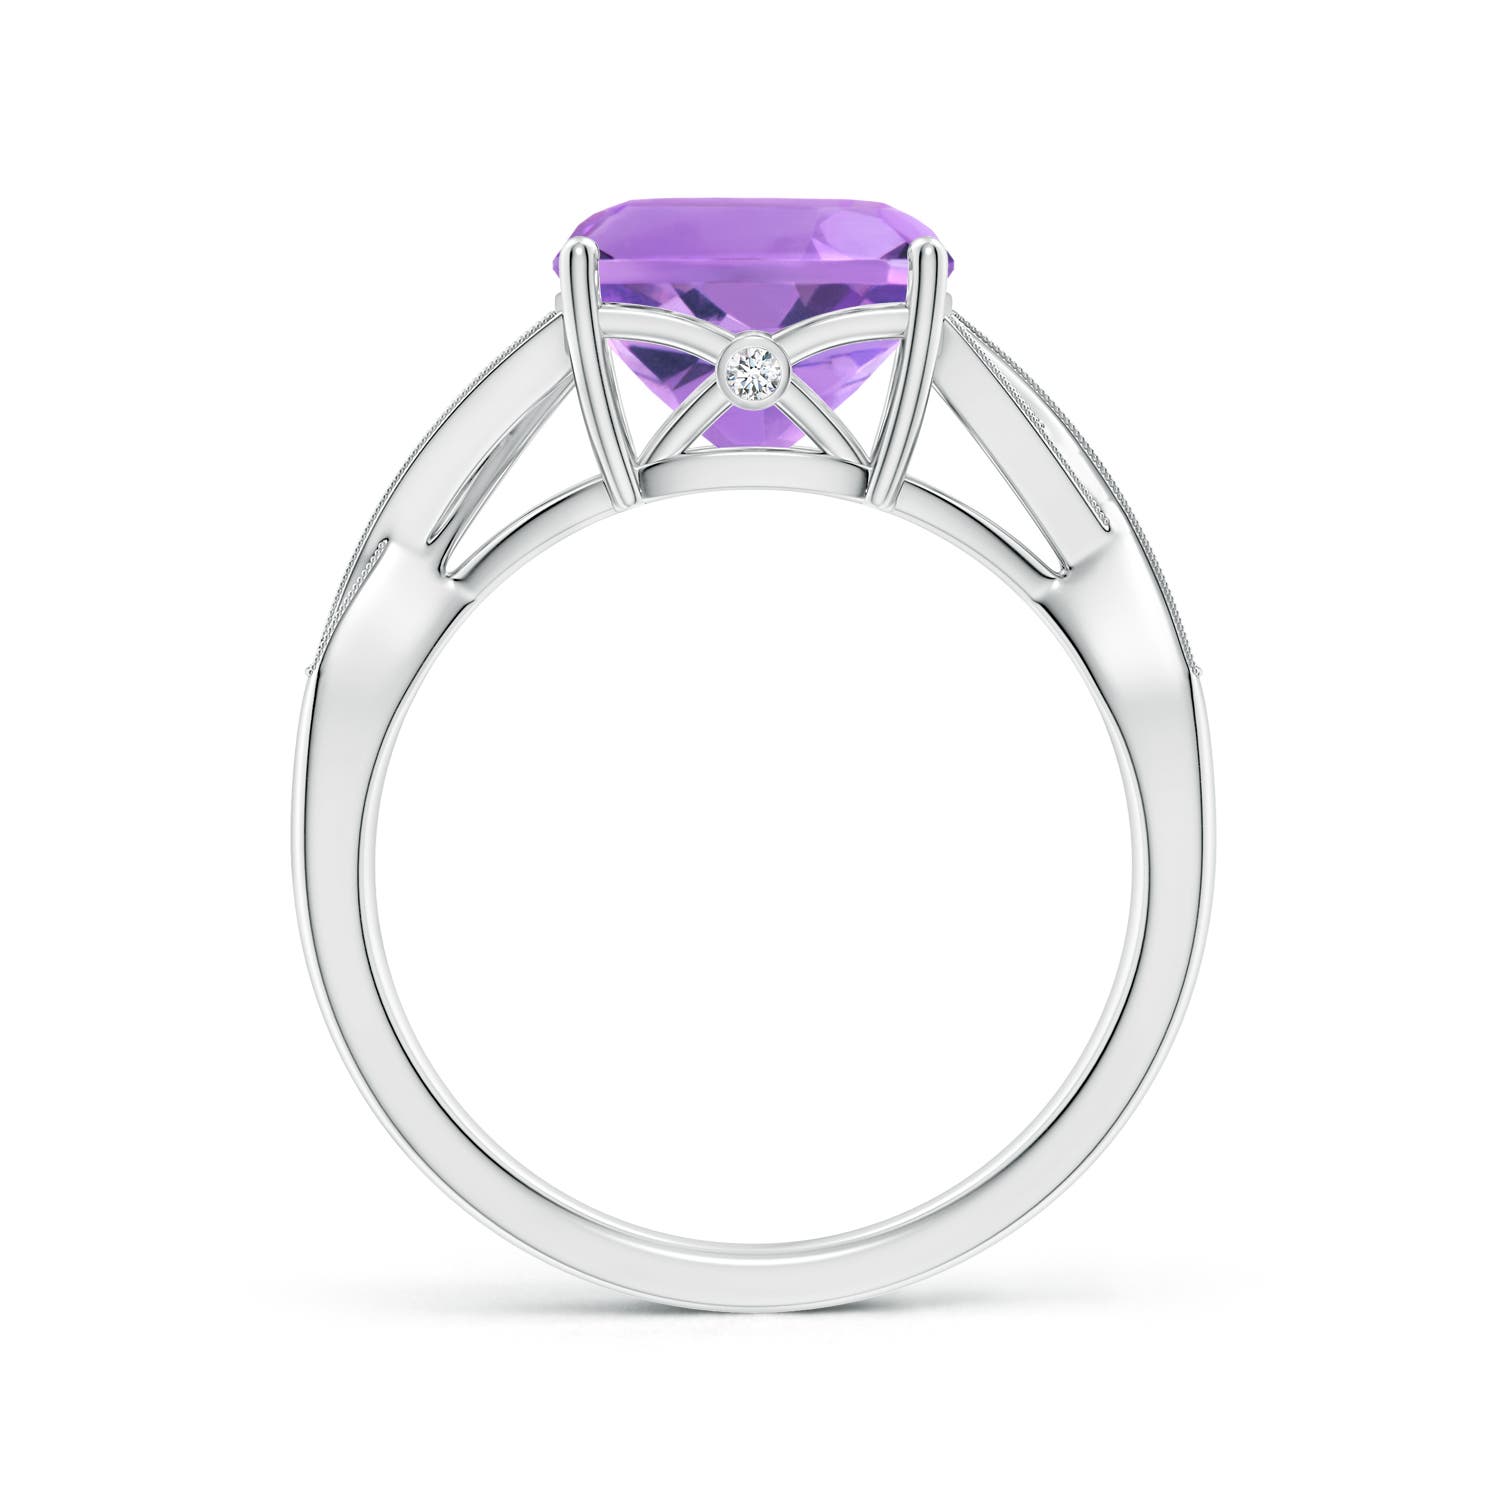 A - Amethyst / 3.24 CT / 14 KT White Gold